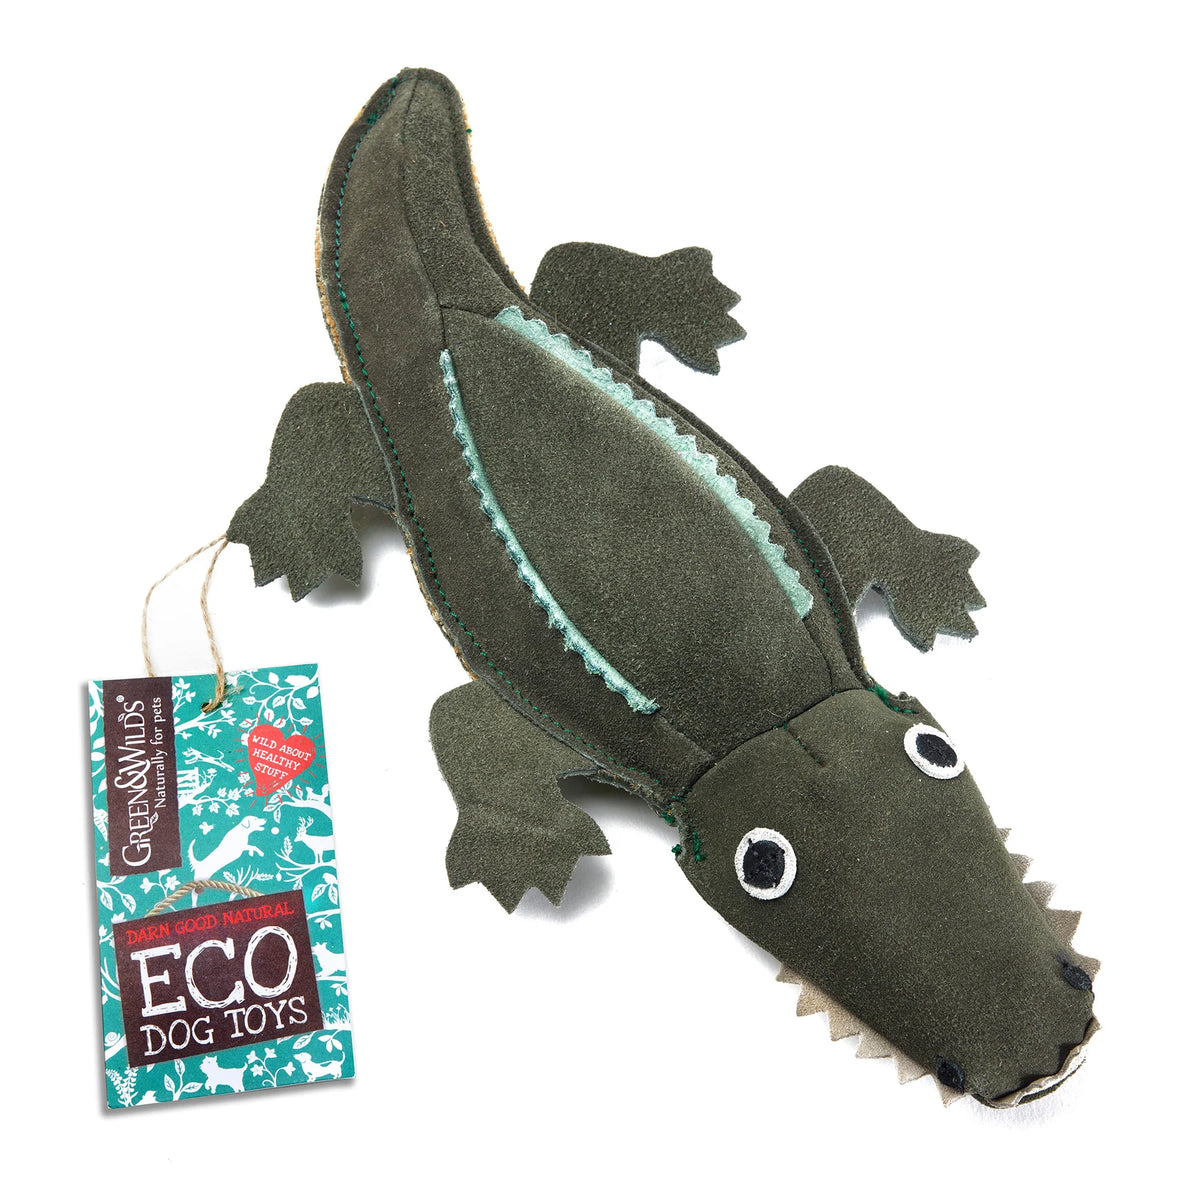 Green & Wilds Colin the Crocodile Eco Dog Toy